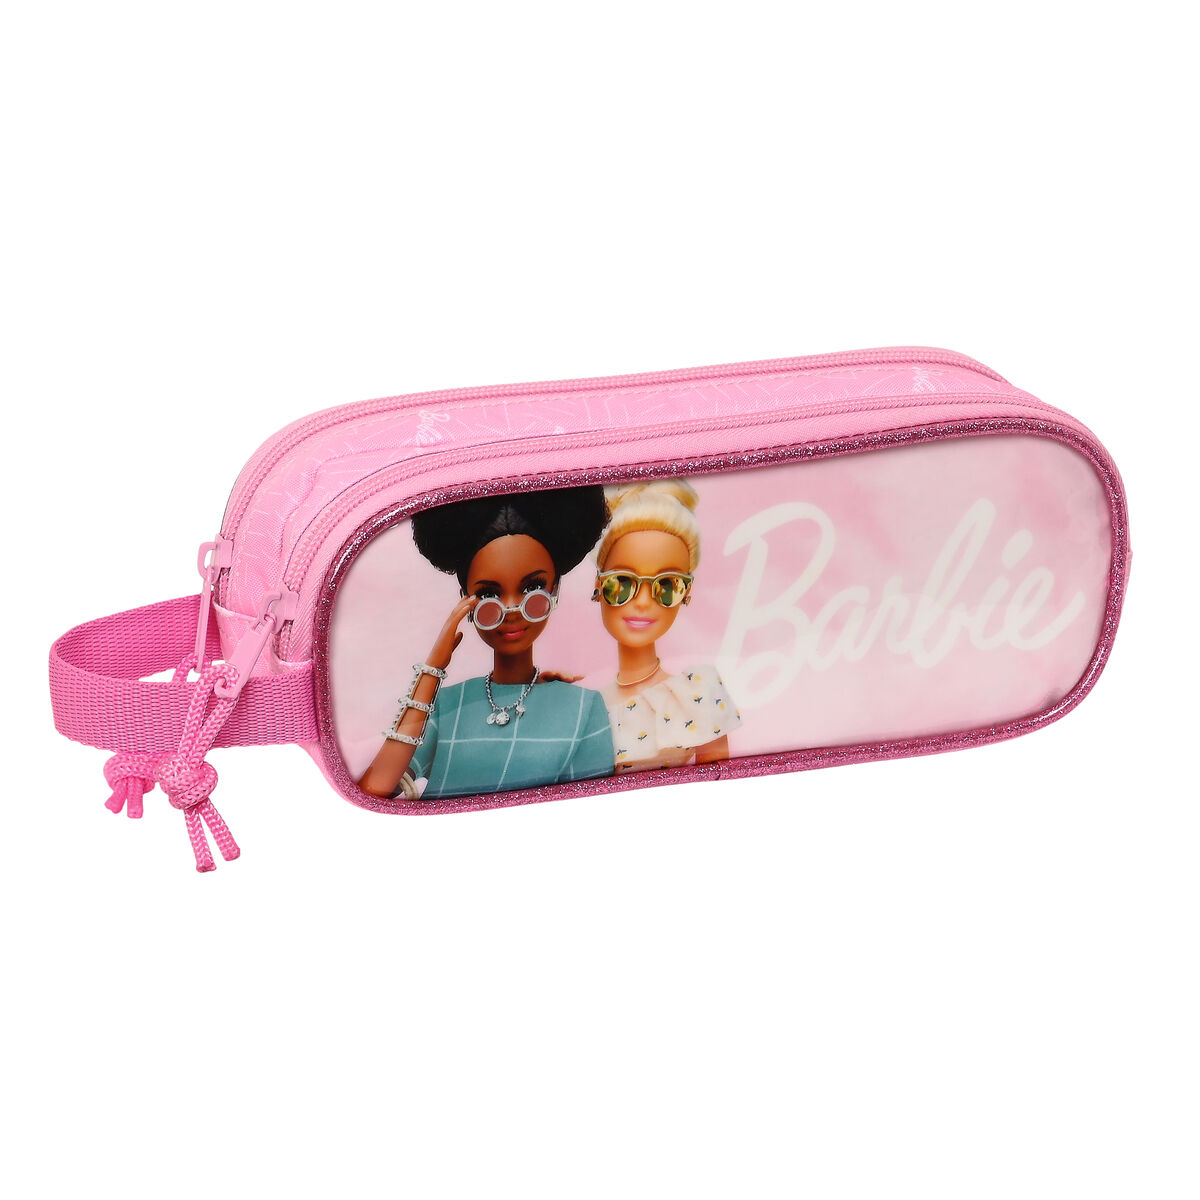 Double Carry-all Barbie Girl Pink (21 x 8 x 6 cm)